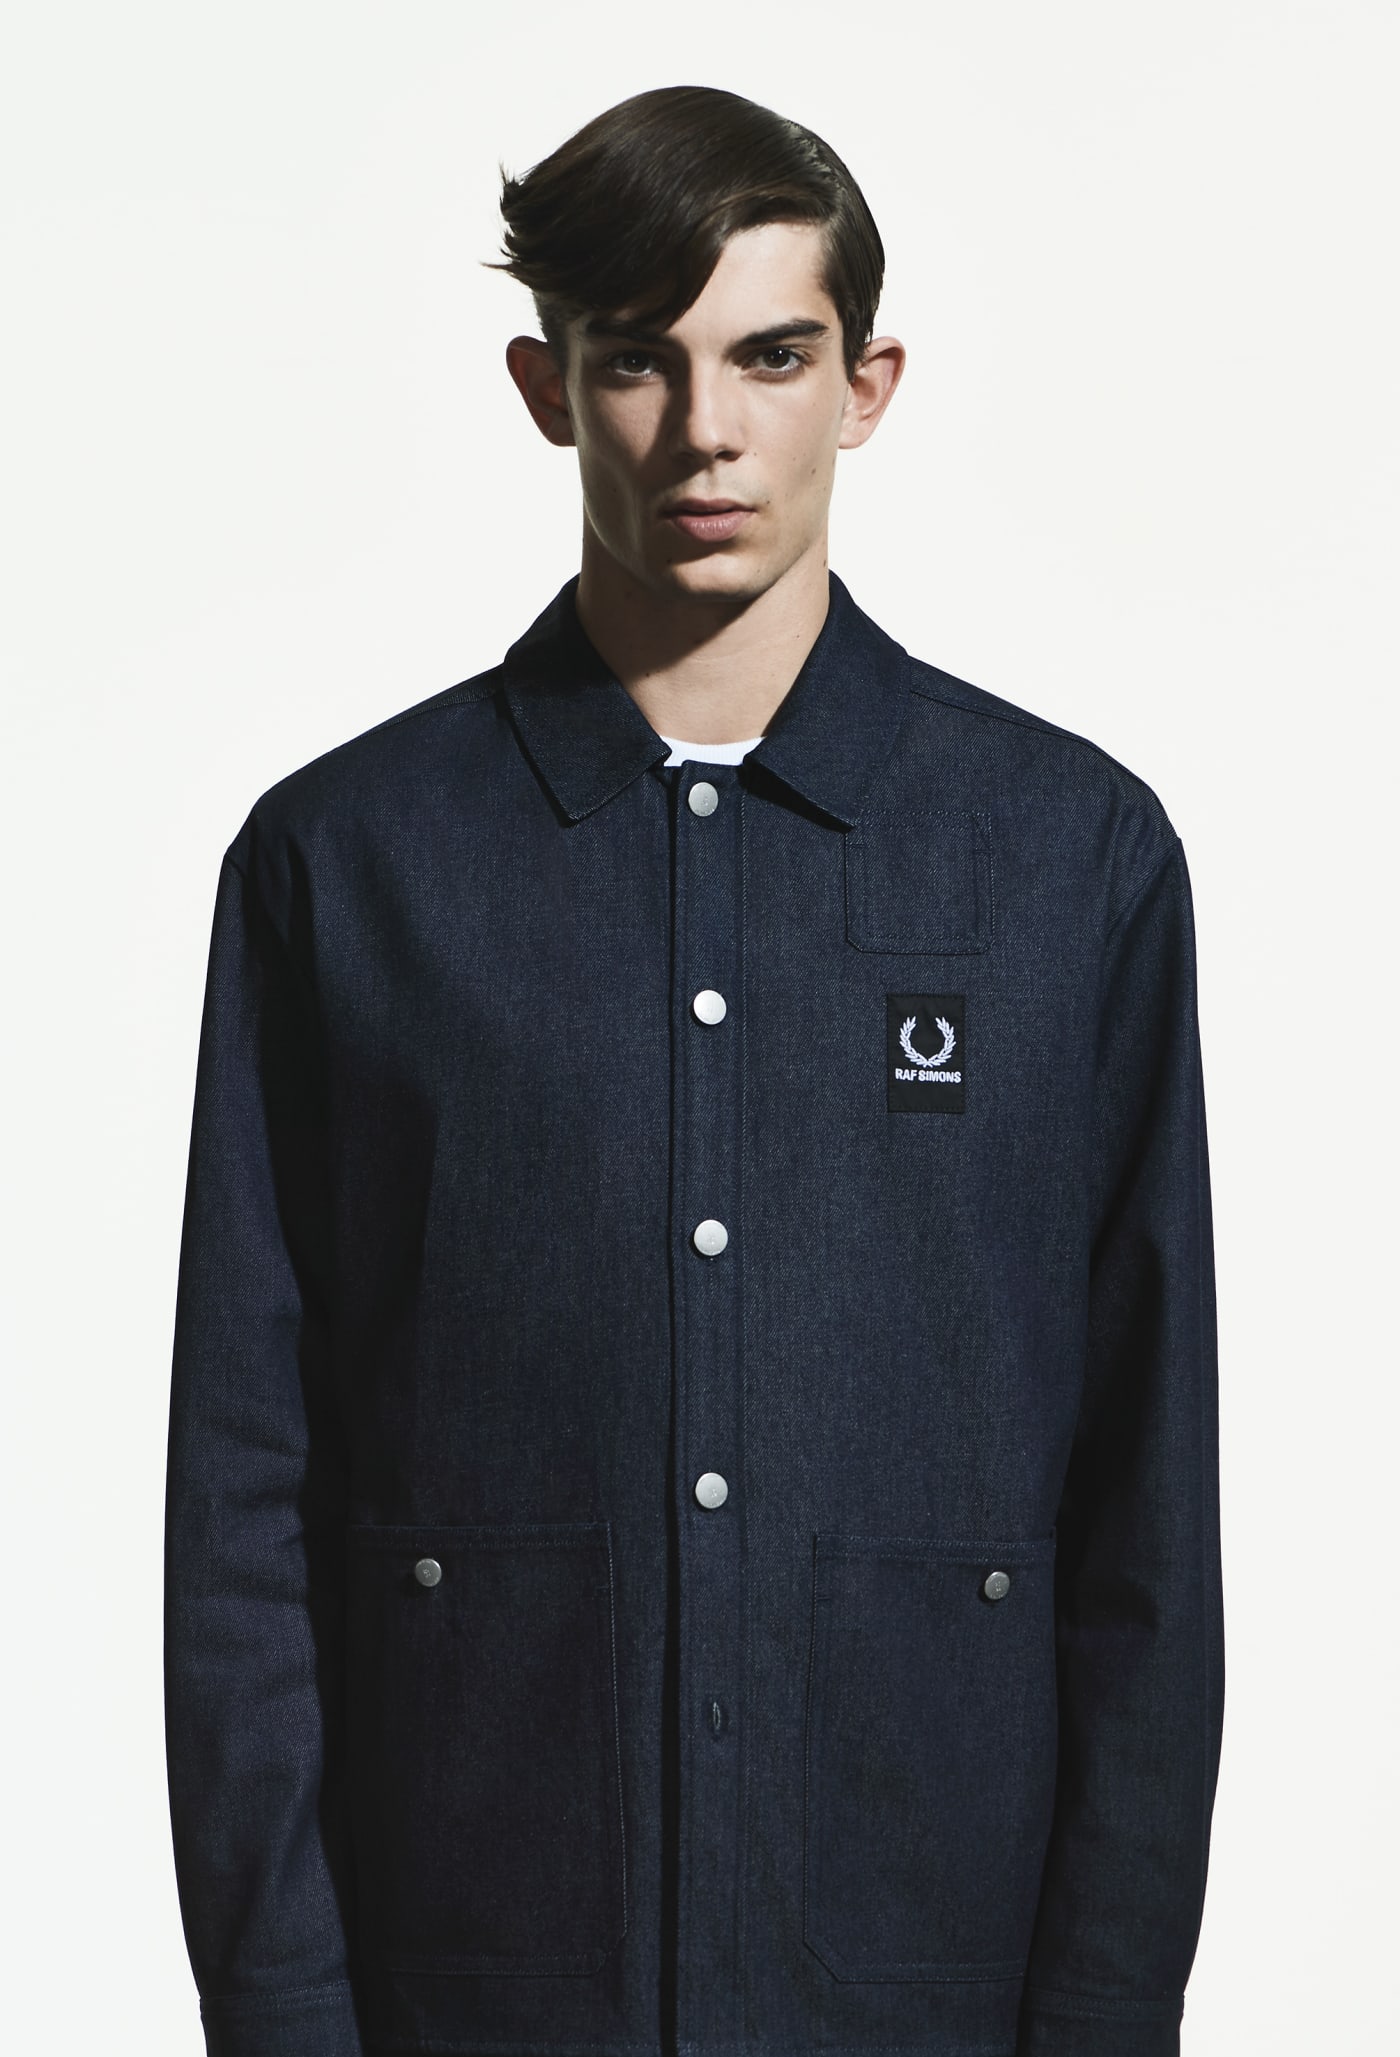 The Latest Fred Perry x Raf Simons Collaboration Dropped Today | Complex UK